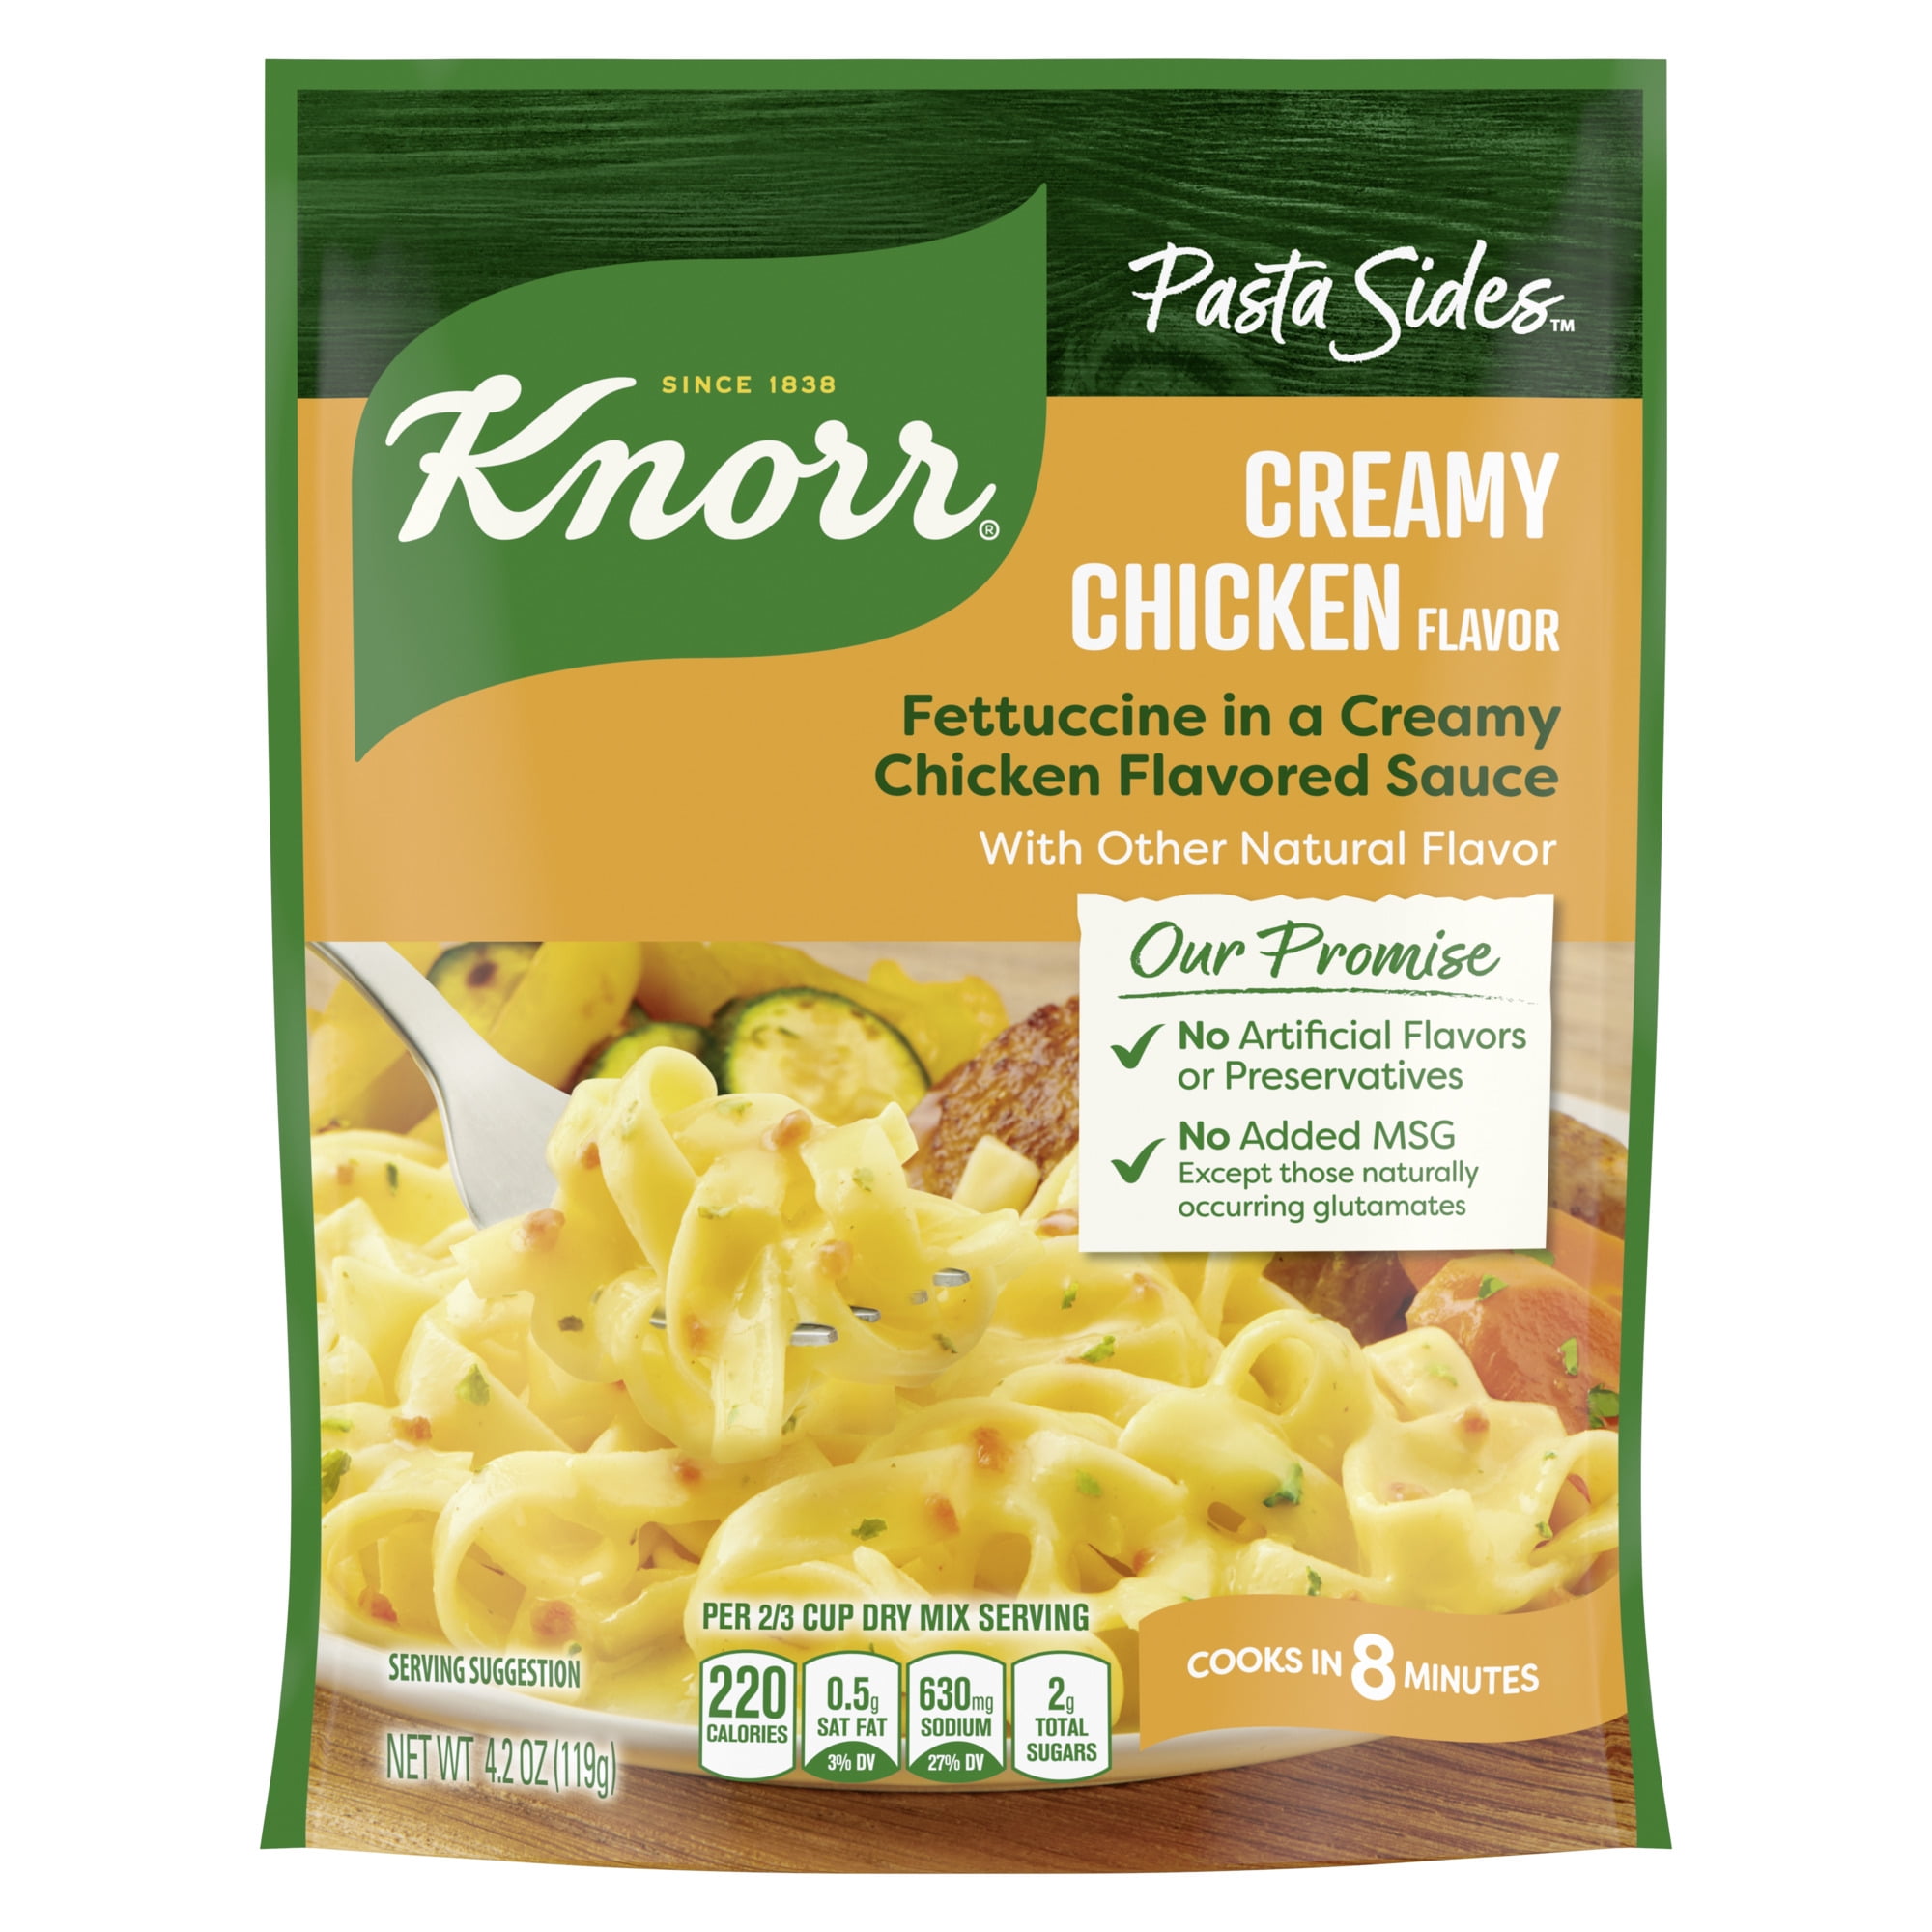 Knorr Pasta Sides Creamy Chicken, Cooks in 8 Minutes, No Artificial Flavors, No Preservatives, No Added MSG 4.2 oz